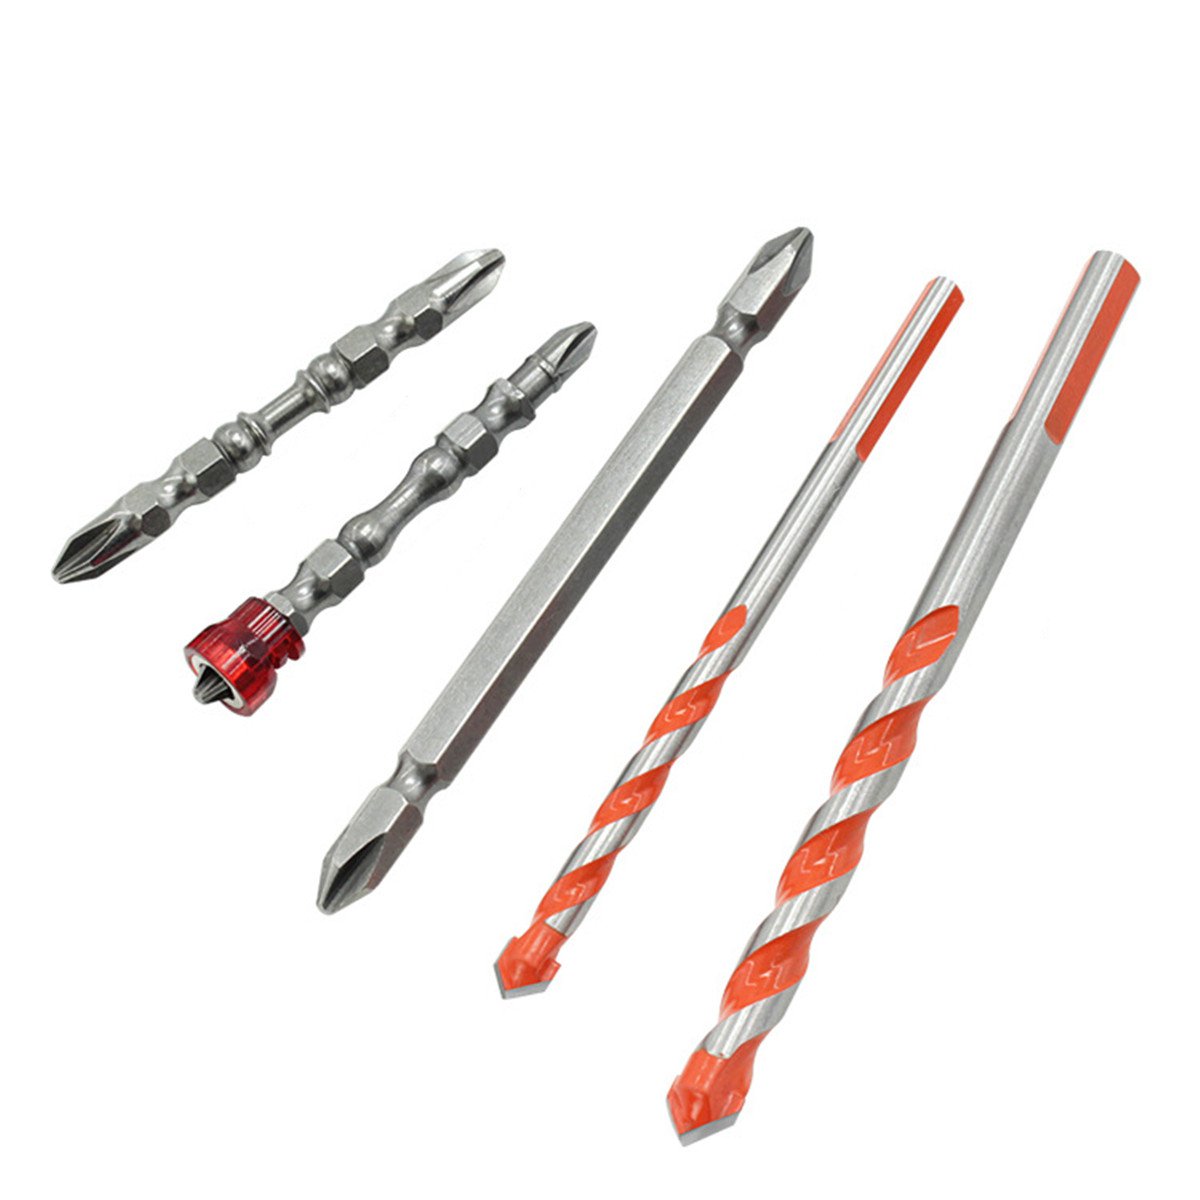 5Pcs-Tile-Glass-Drill-Set-Magnetic-Ring-Cross-Screwdriver-Bit-Multifunctional-Cutter-Marble-1602044-2